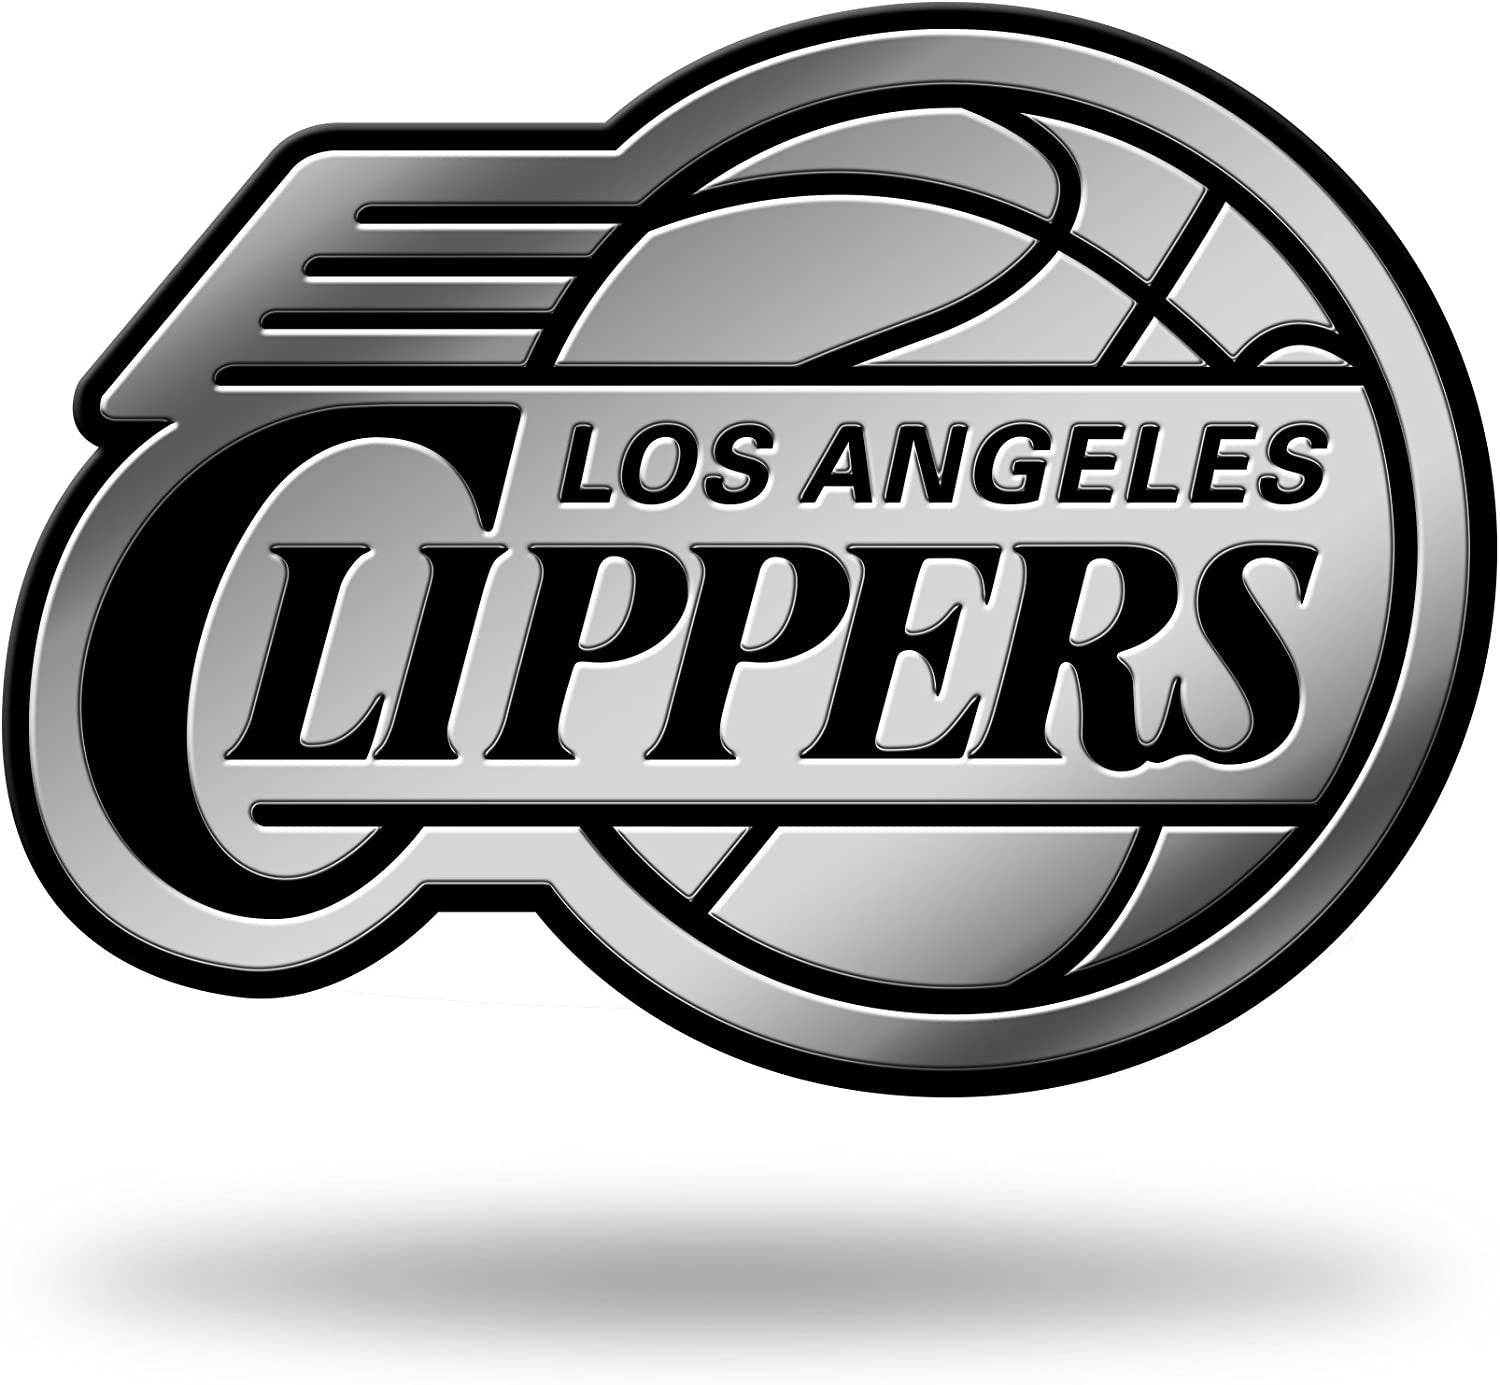 Los Angeles Clippers Silver Chrome Color Auto Emblem, Raised Molded Plastic, 3.5 Inch, Adhesive Tape Backing